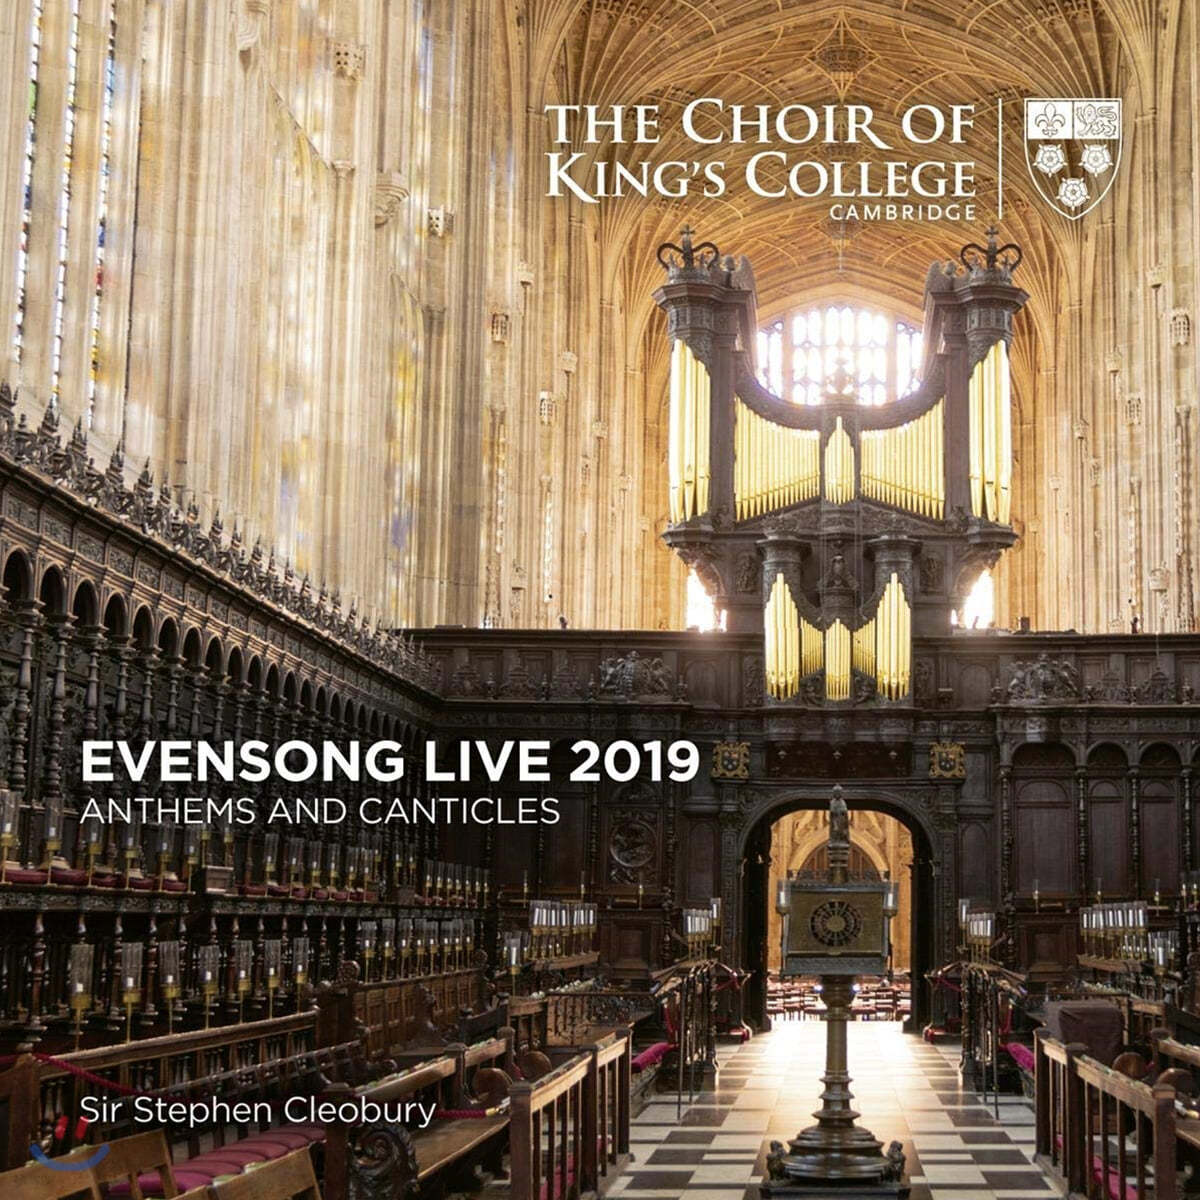 Choir of King's College Cambridge 캠브리지 킹스 칼리지 합창단 이븐 송 라이브 2019 (Evensong Live 2019: Anthems and Canticles)